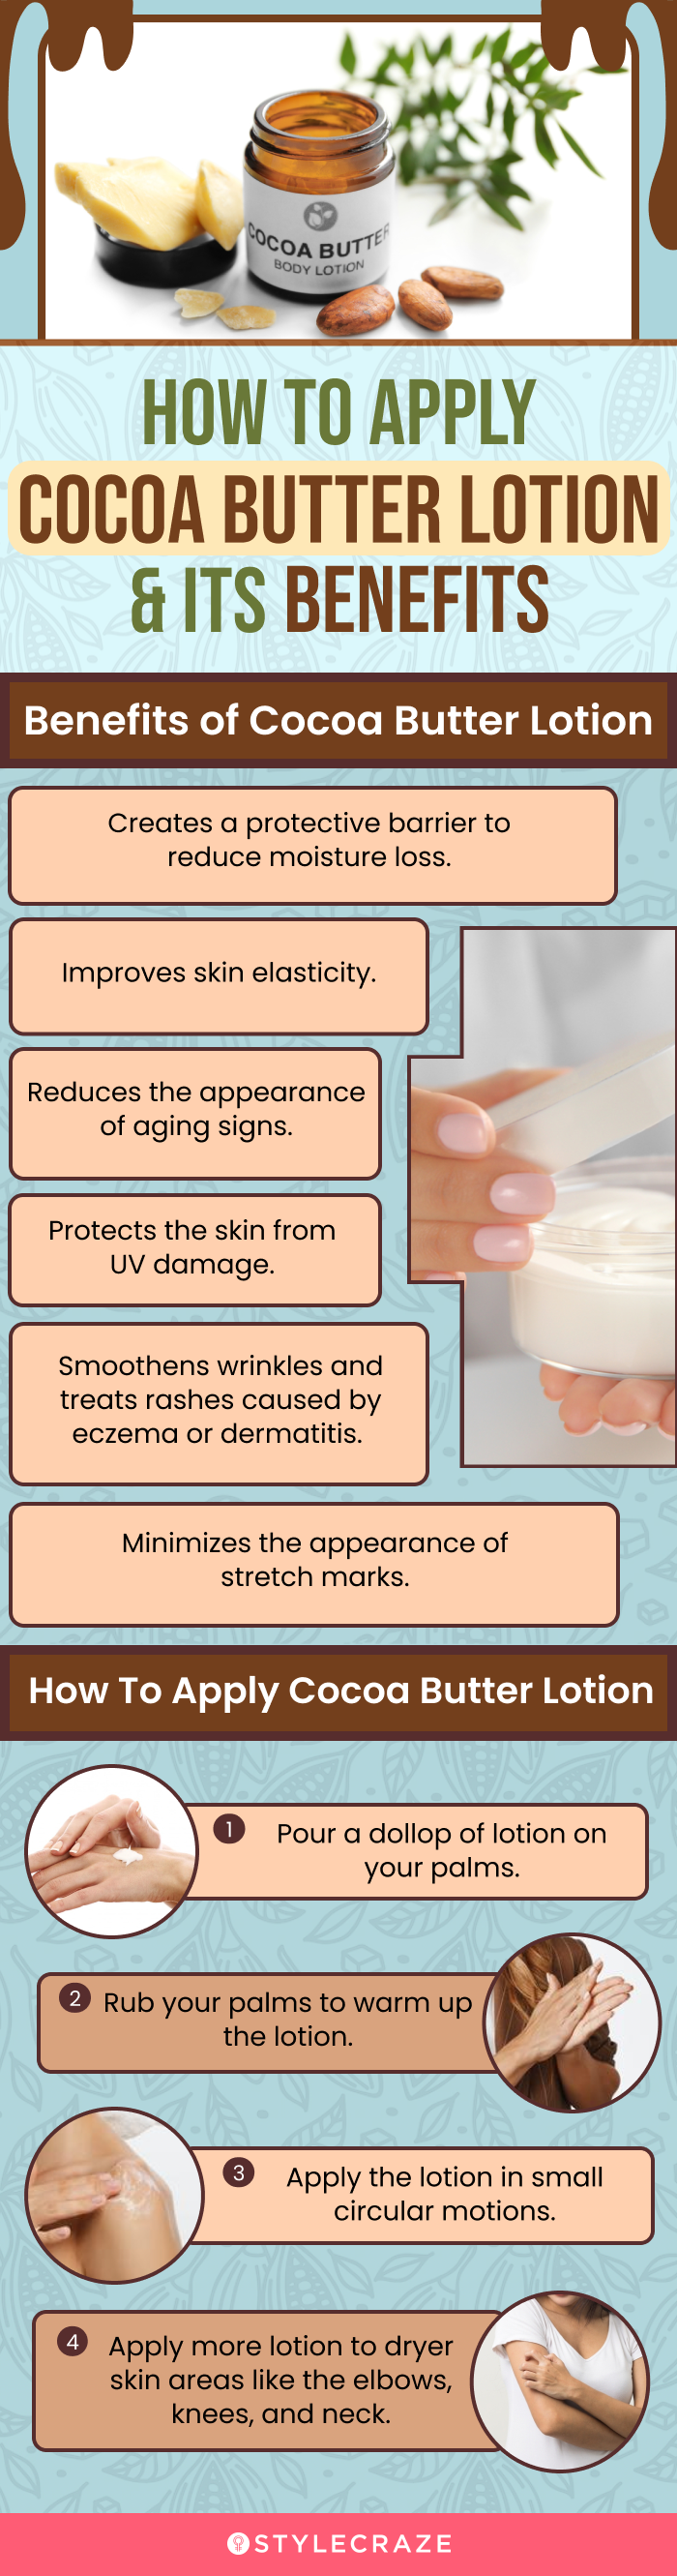 How To Apply Cocoa Butter Lotion & Its Benefits